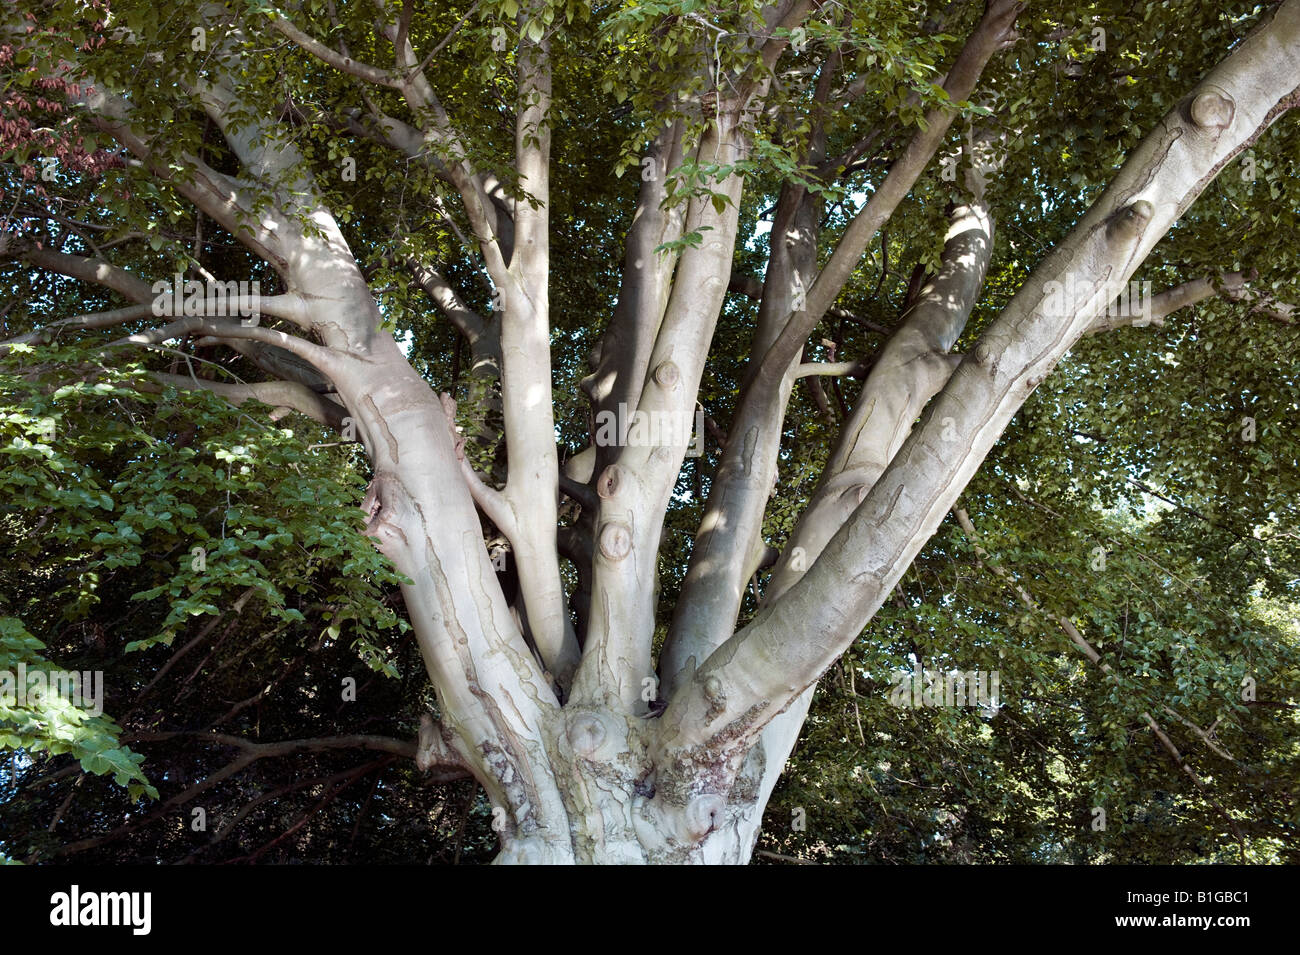 Oak tree large branches Stock Photo